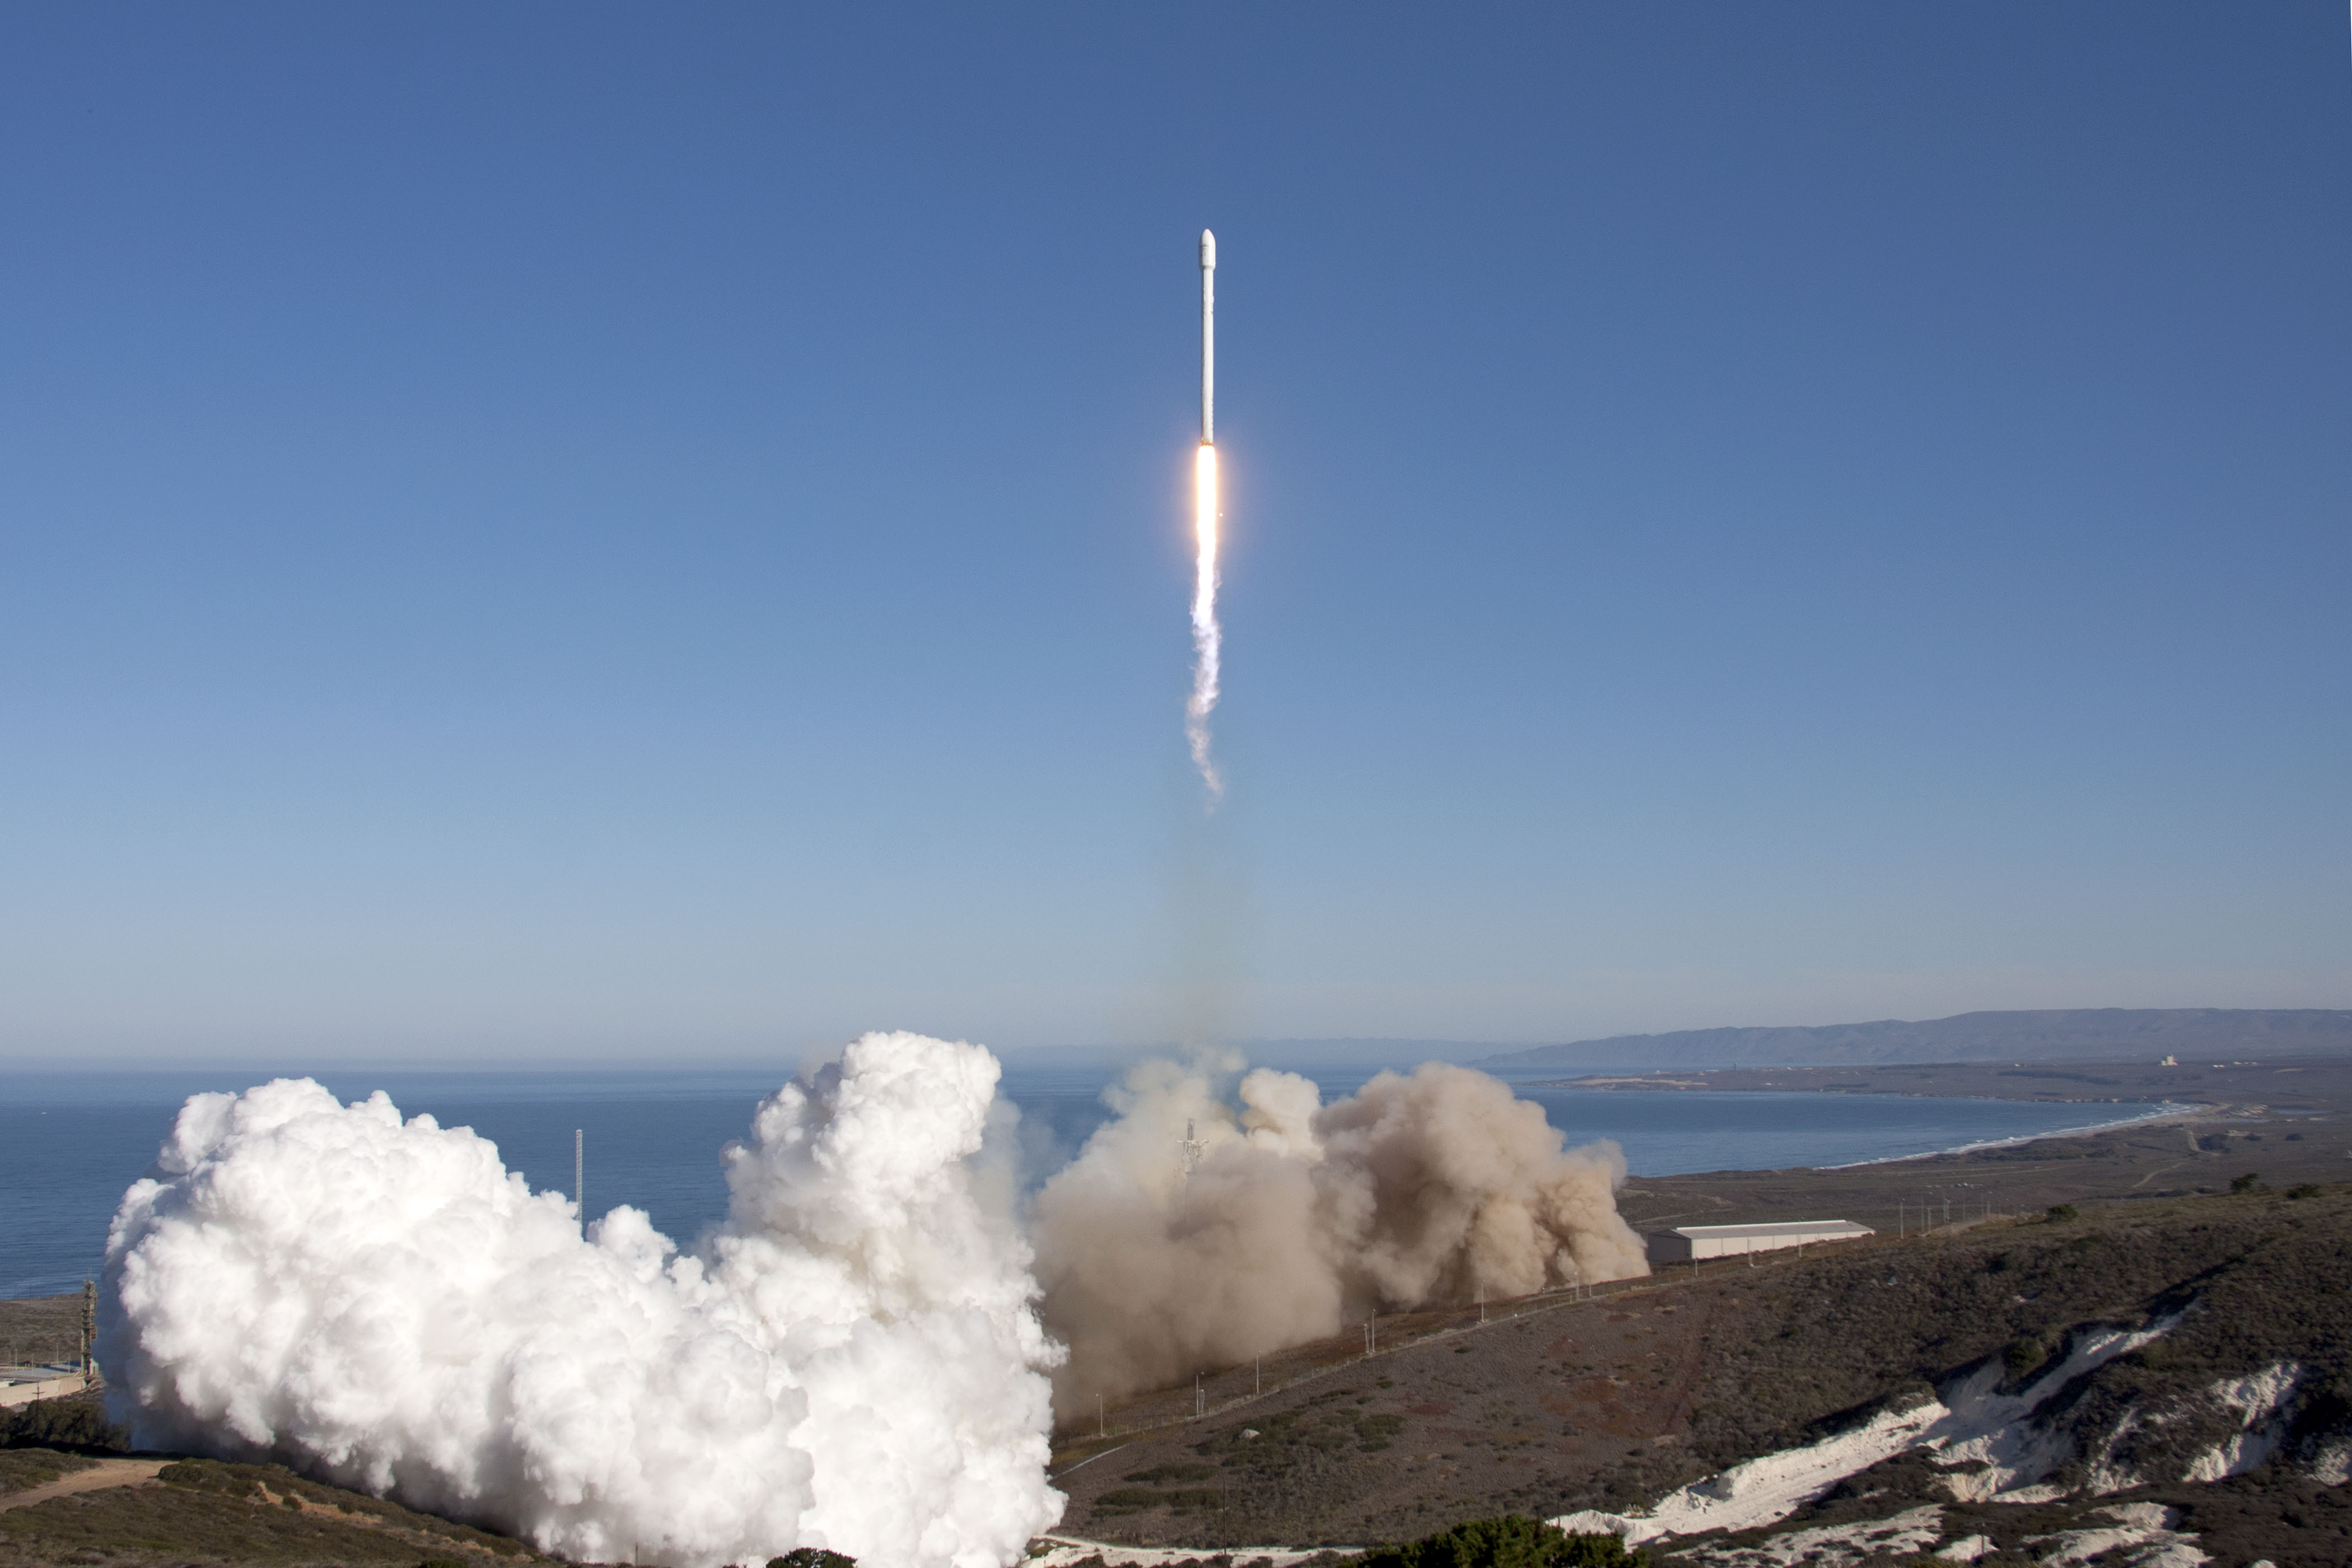 An Upgraded Spacex Falcon Rocket Roars To Life In This Split Screen